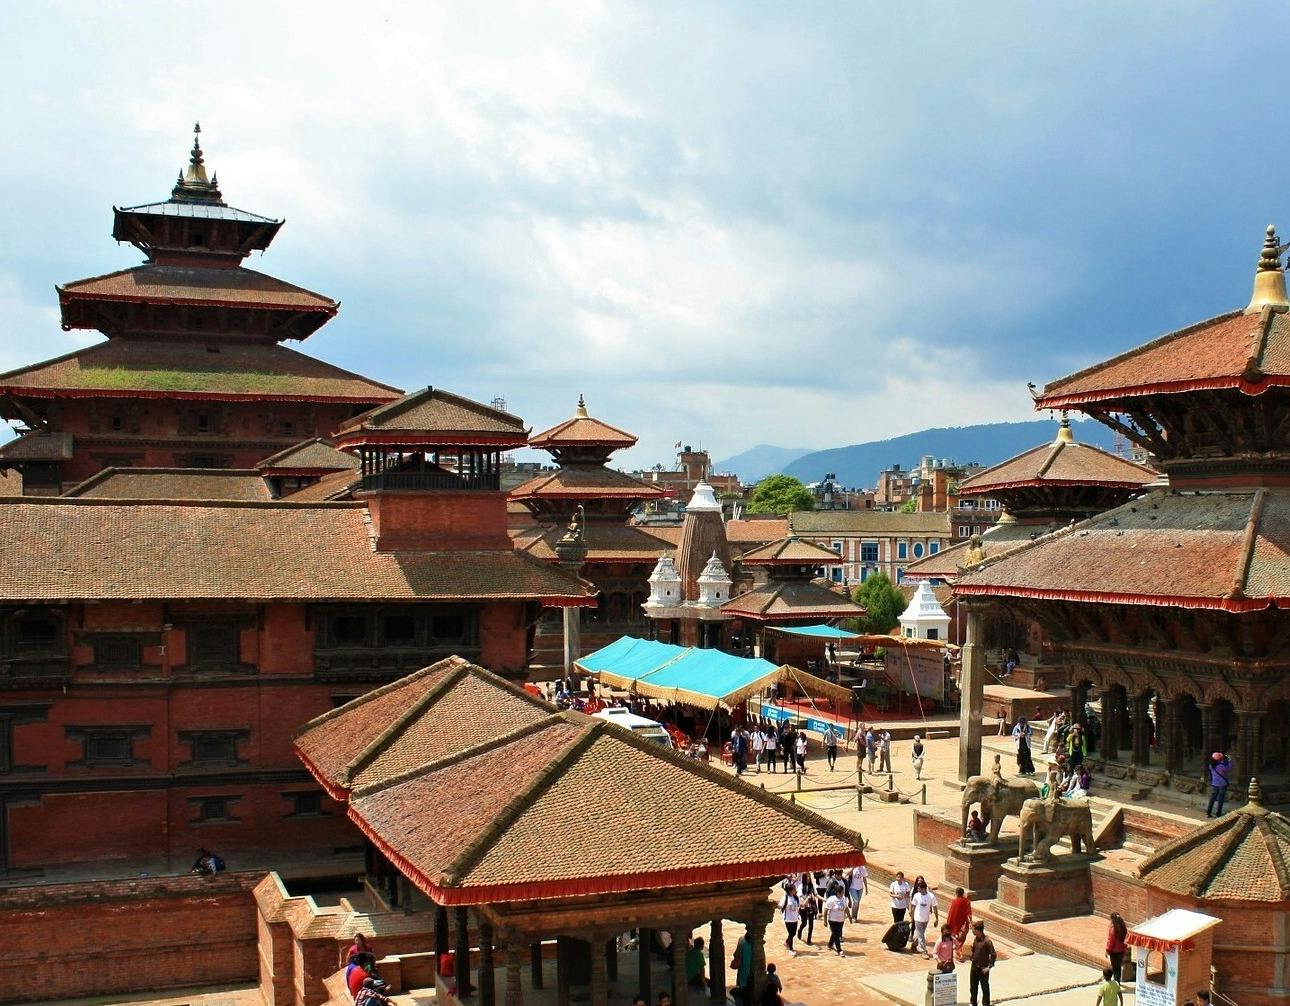 The Three Ancient Cities of the Kathmandu Valley